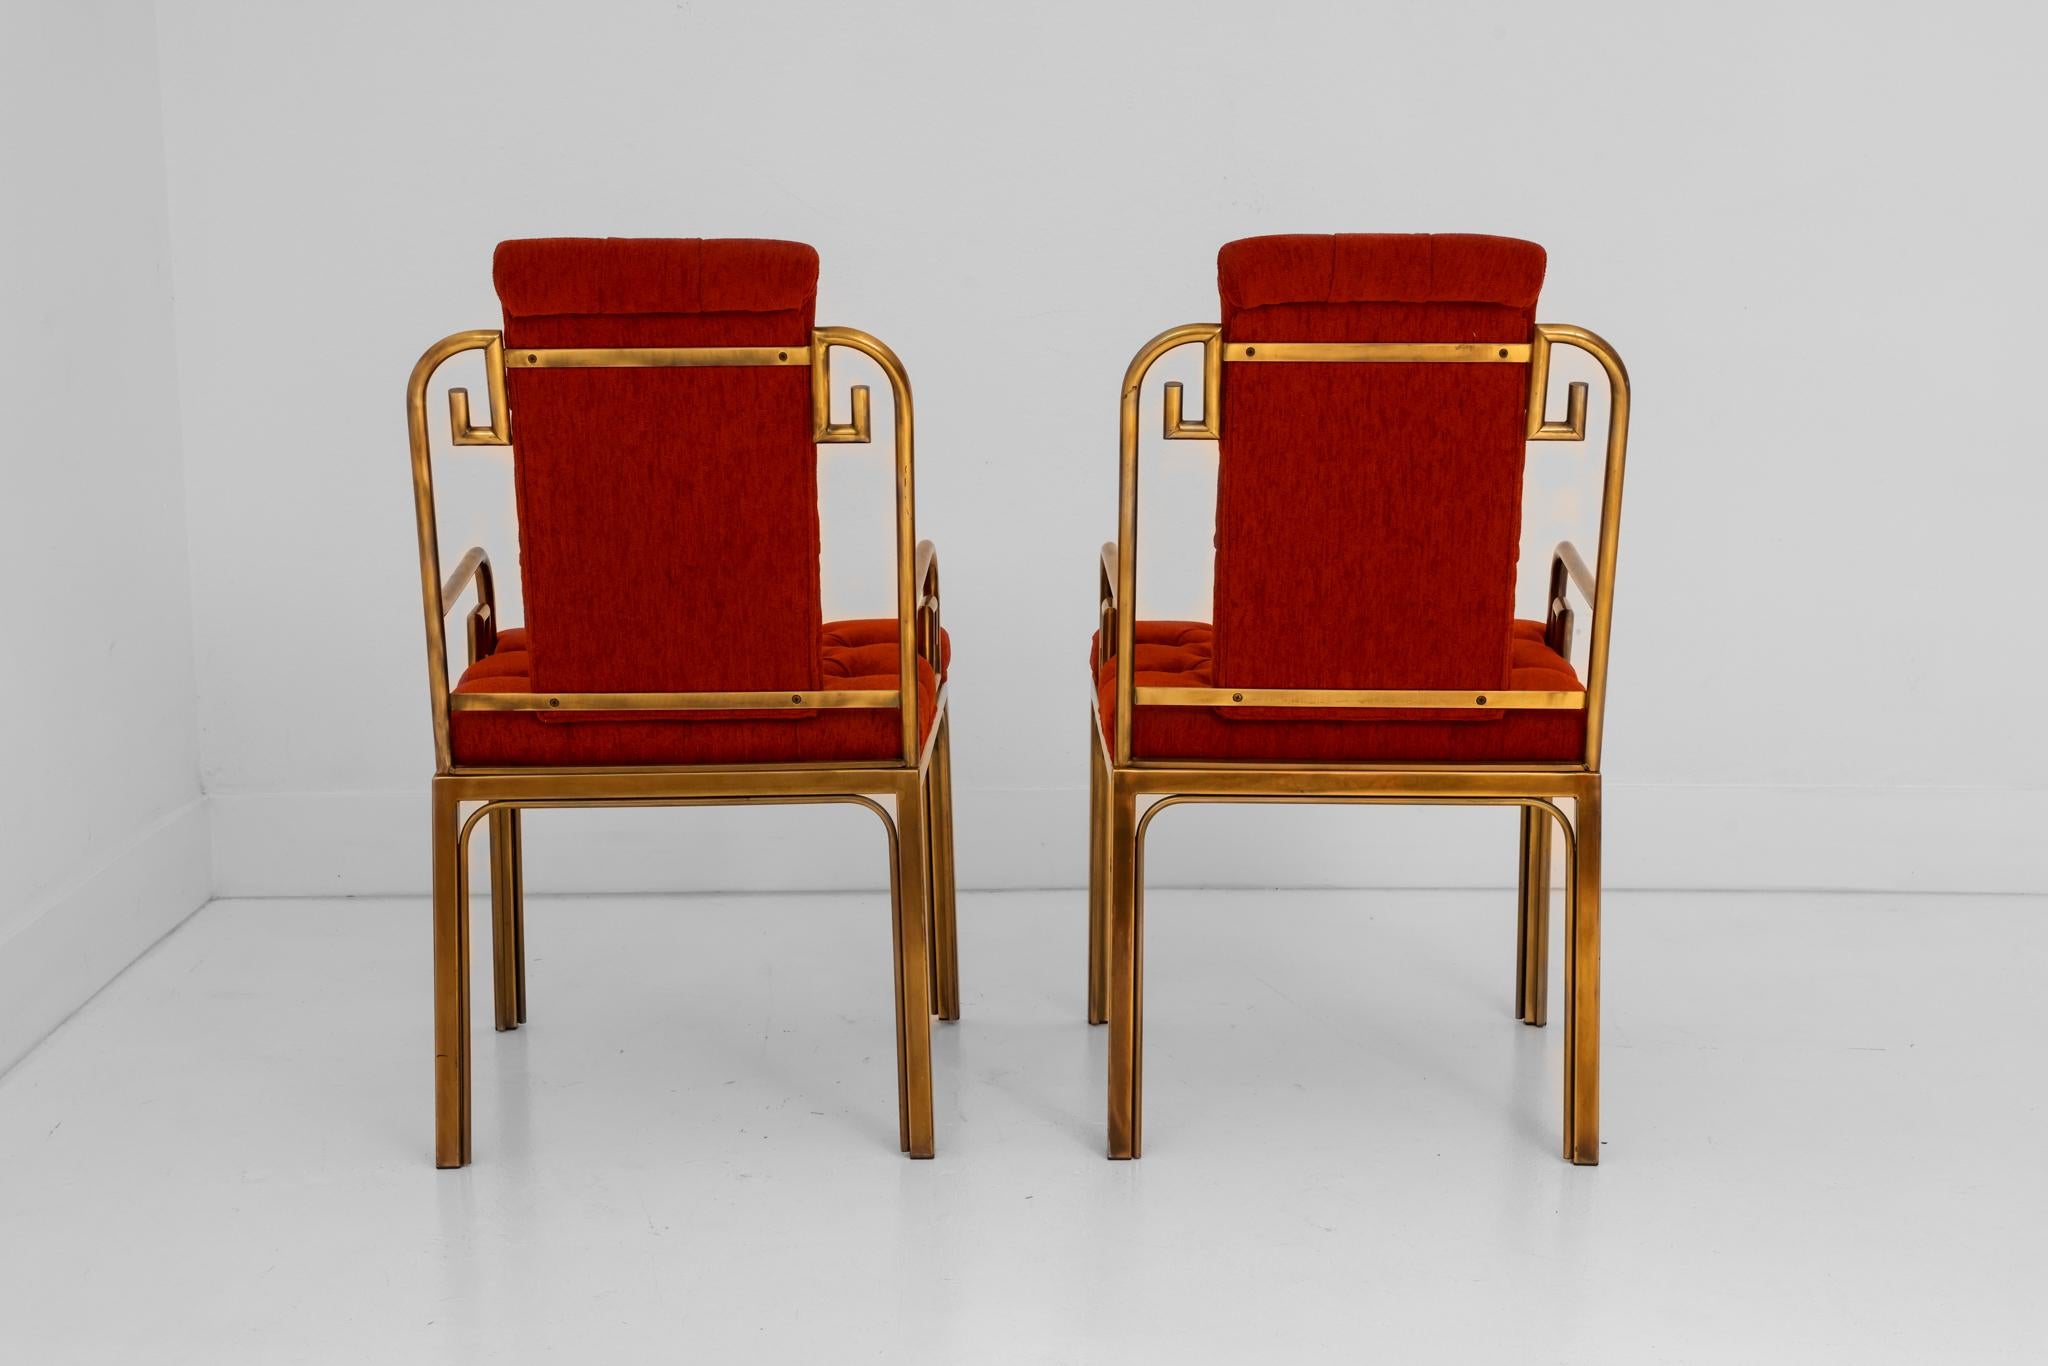 Hollywood Regency A Pair of Brass Greek Key Chairs Designed by Bernhard Rohne for Master Craft For Sale